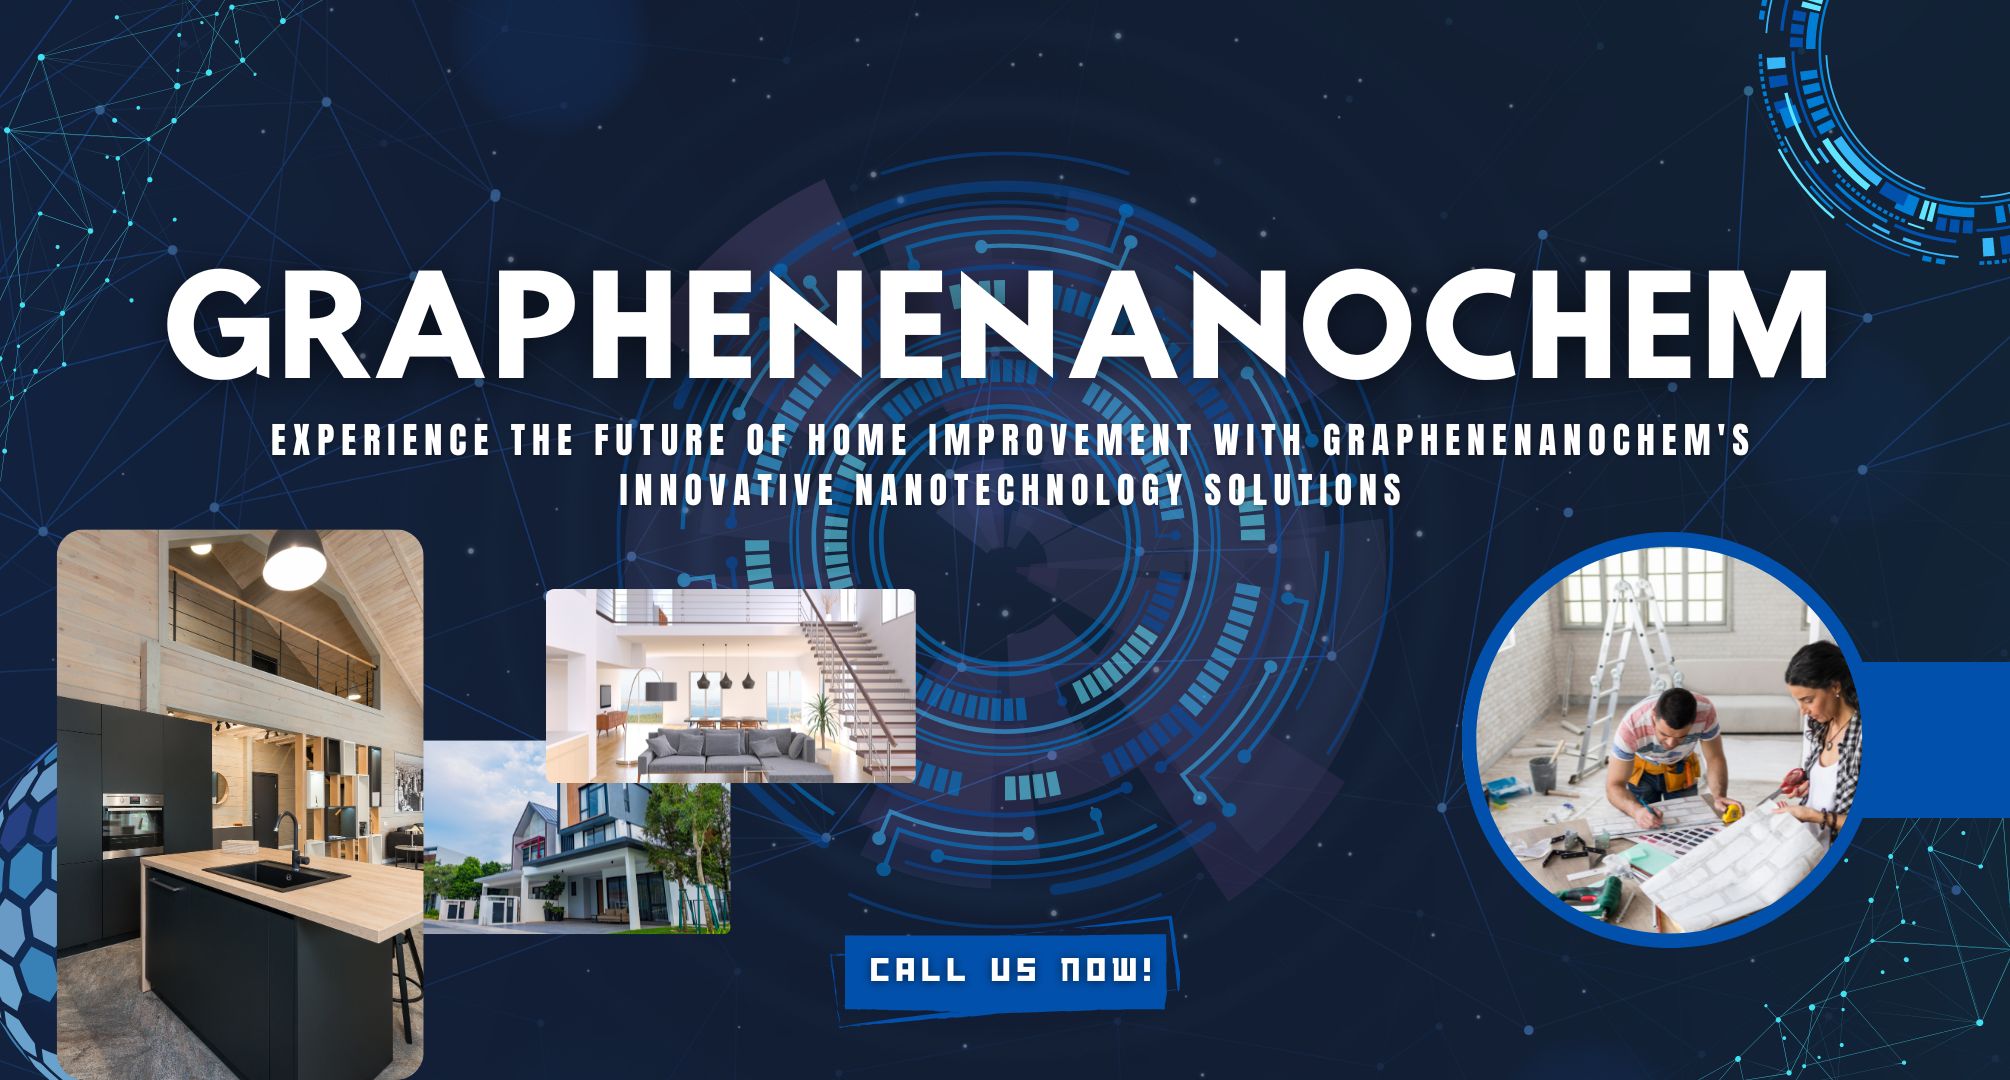 Experience the Future of Home Improvement with GrapheneNanoChem's Next-Generation Nanotechnology
